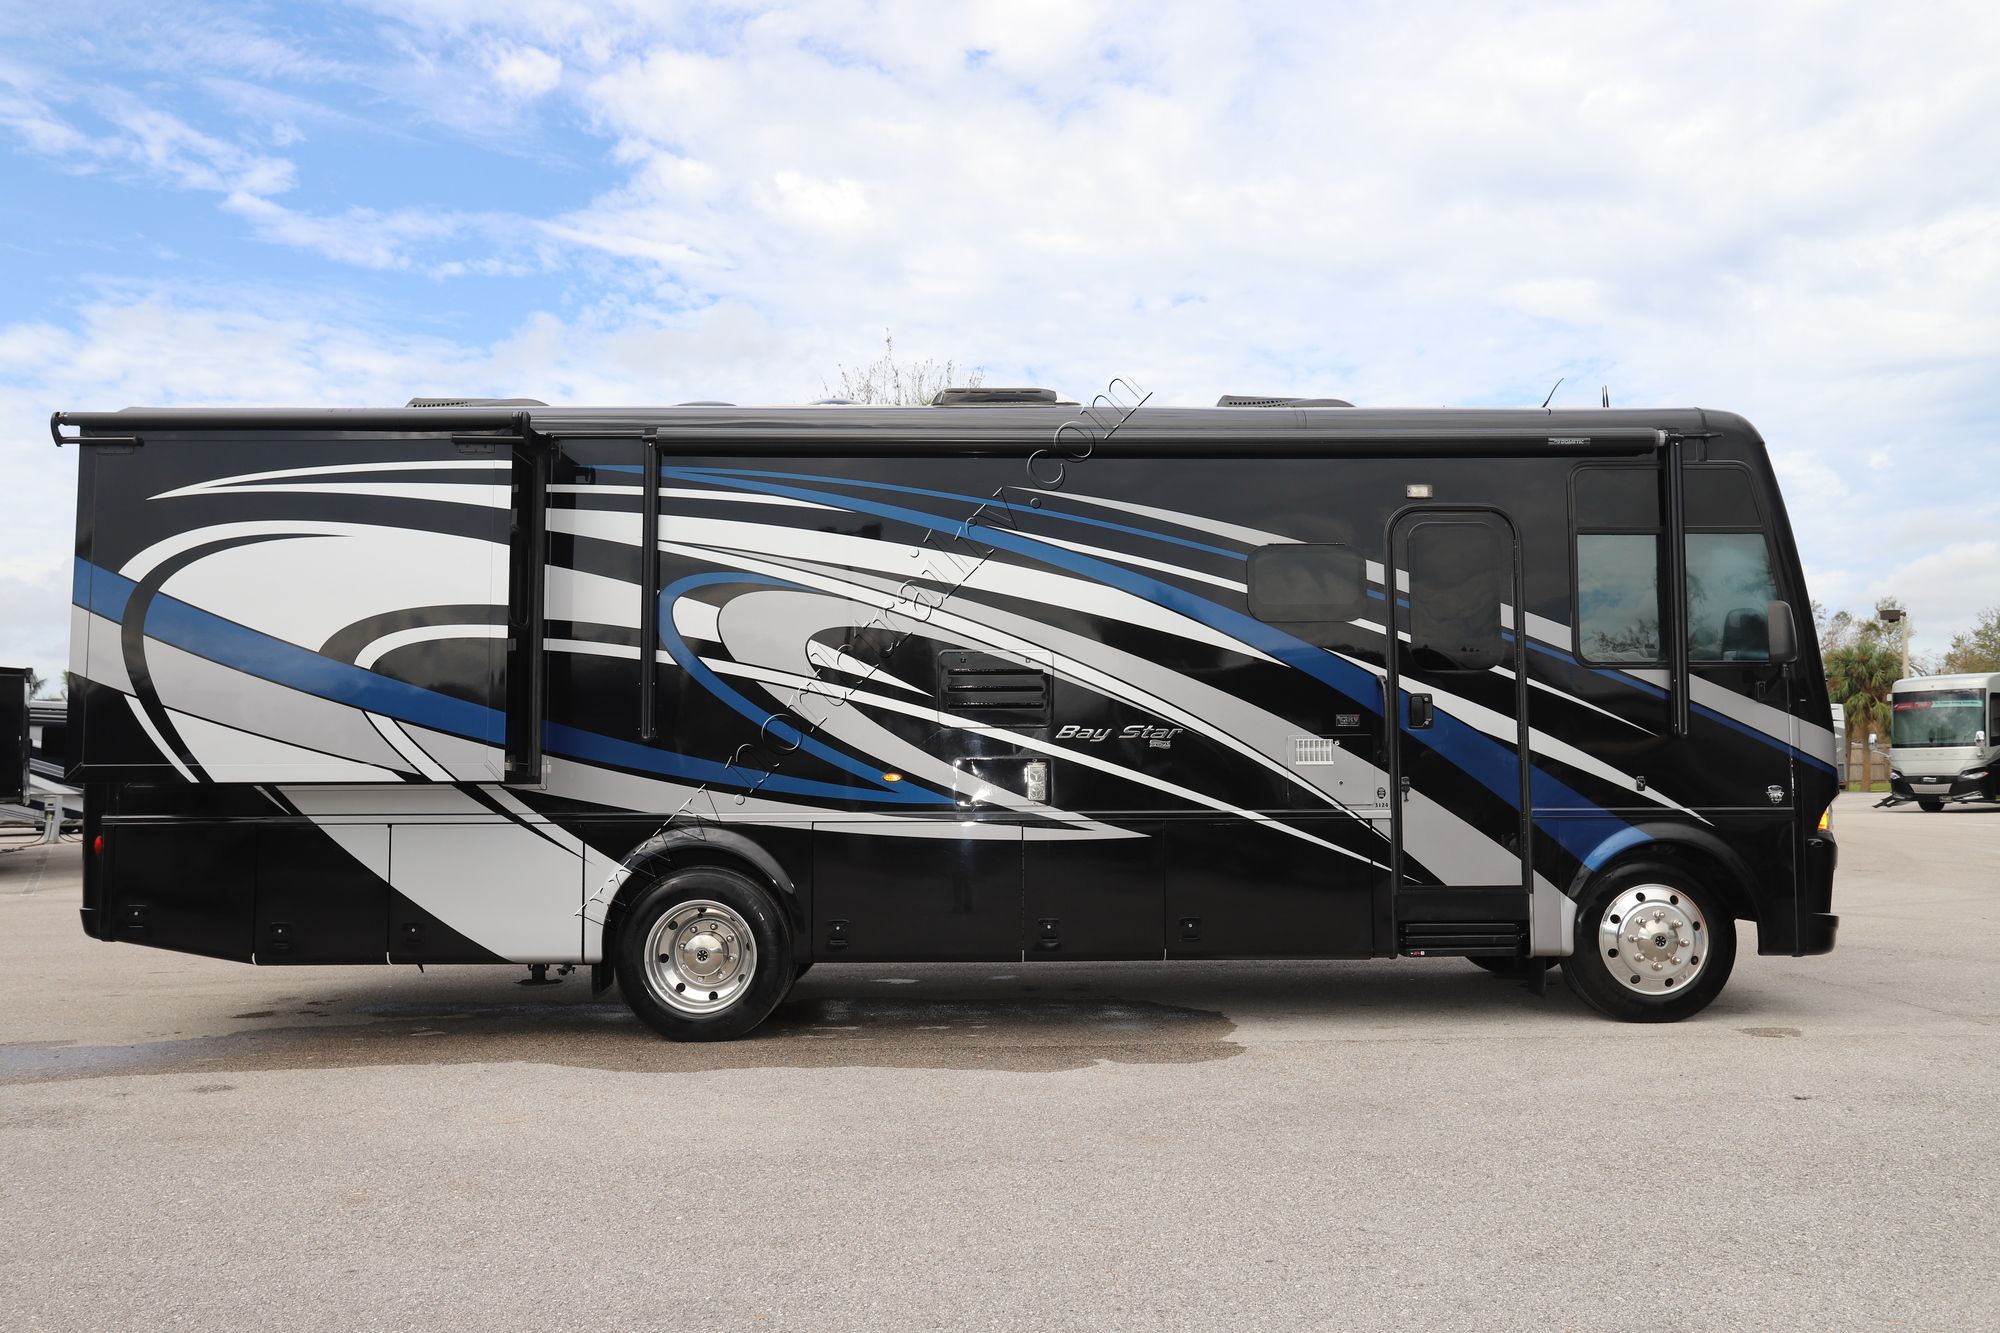 Used 2019 Newmar Bay Star 3124 Class A  For Sale